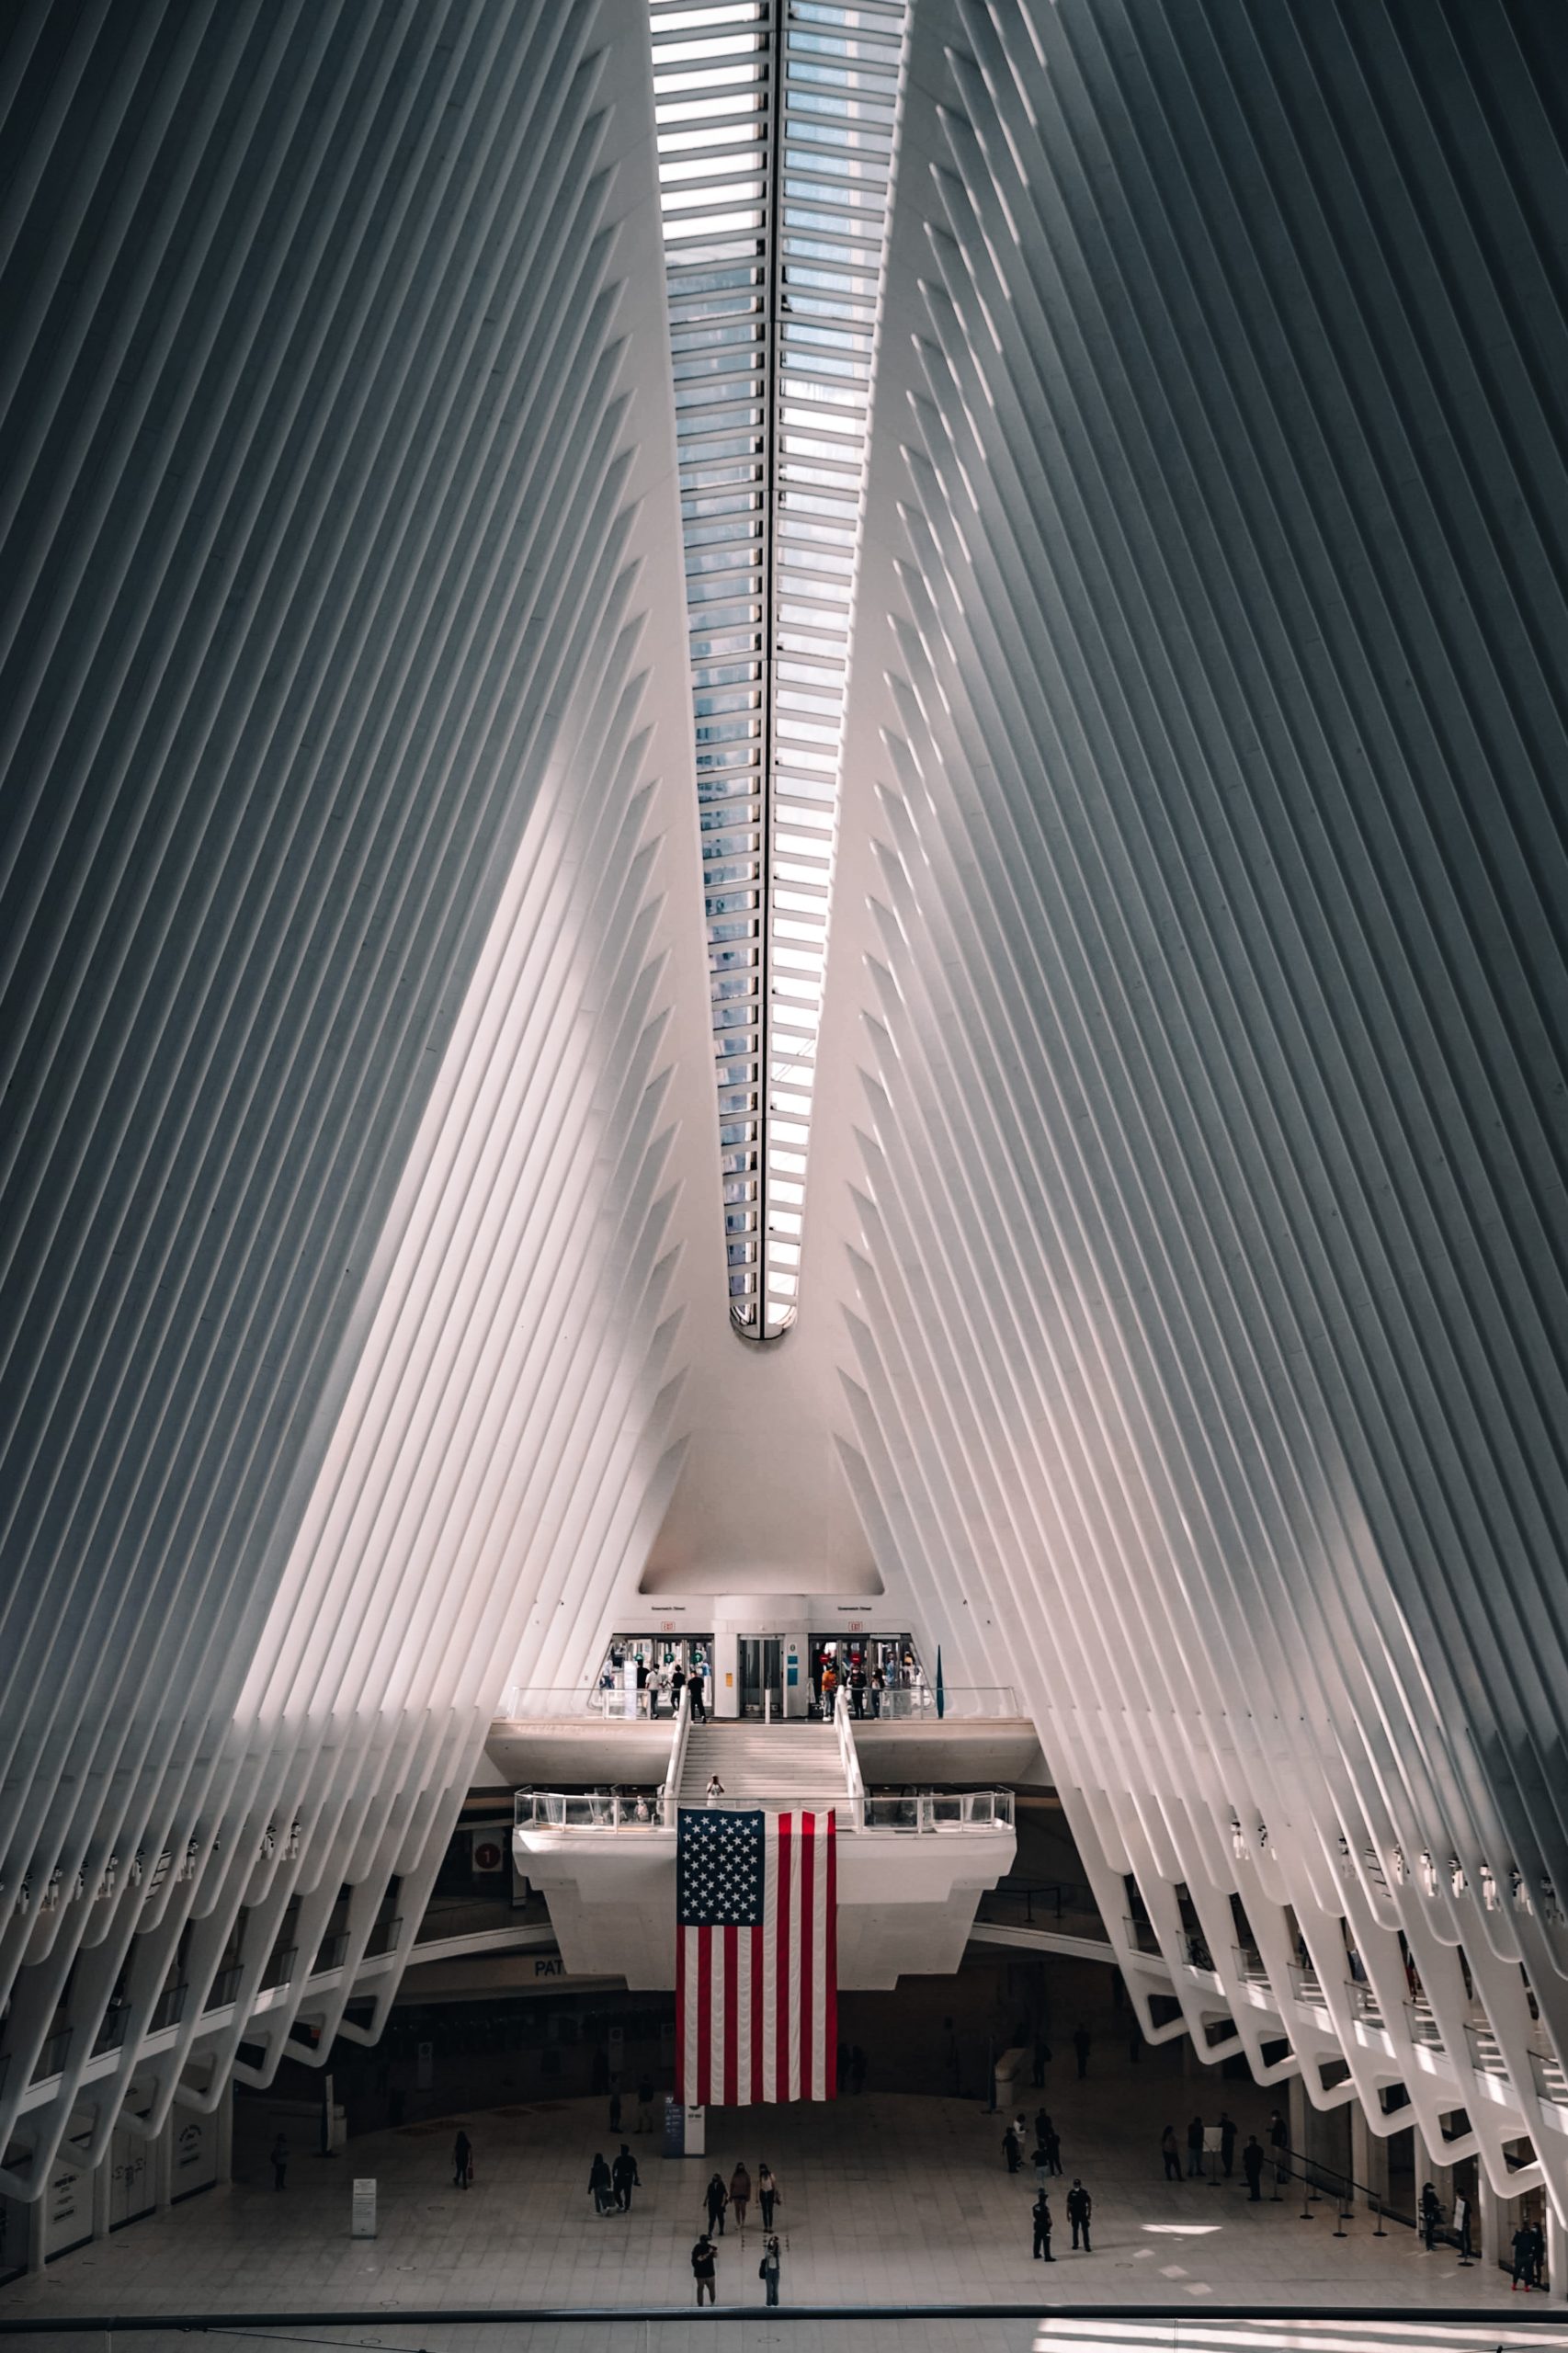 Spacious modern monochromatic building in white featuring a United States flag.